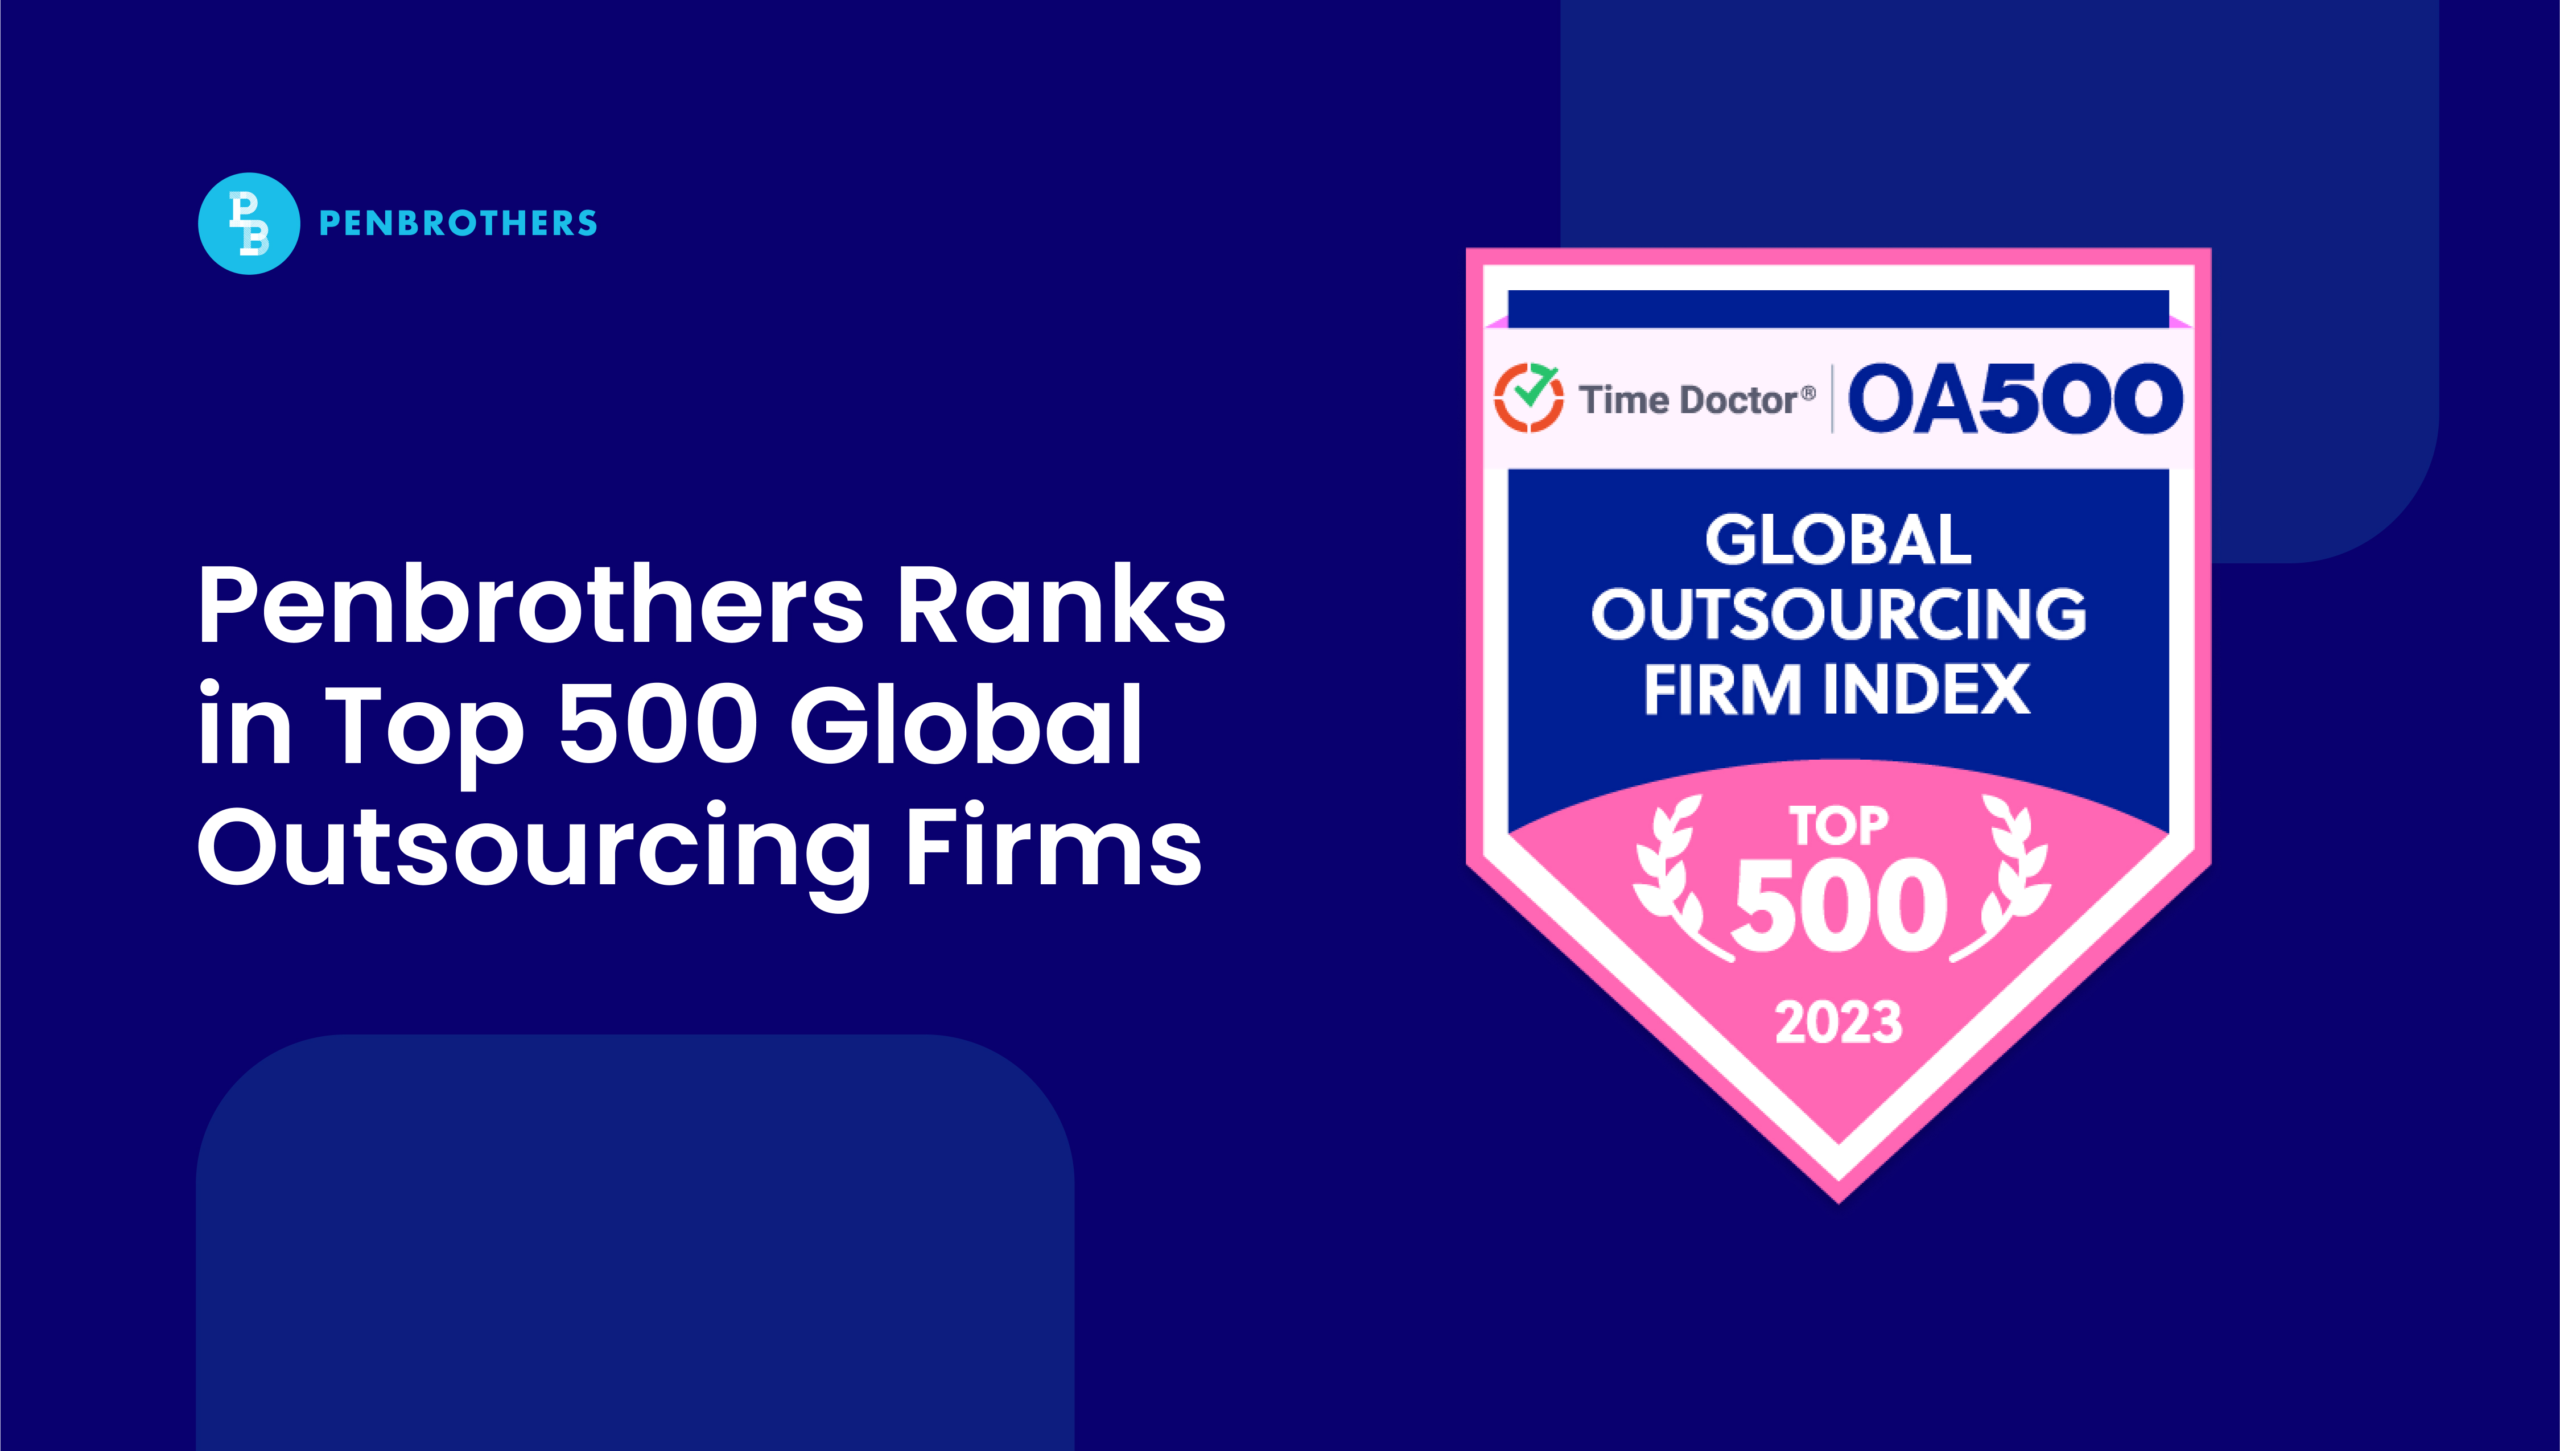 Penbrothers Named One of the Top 500 Global Outsourcing Firms